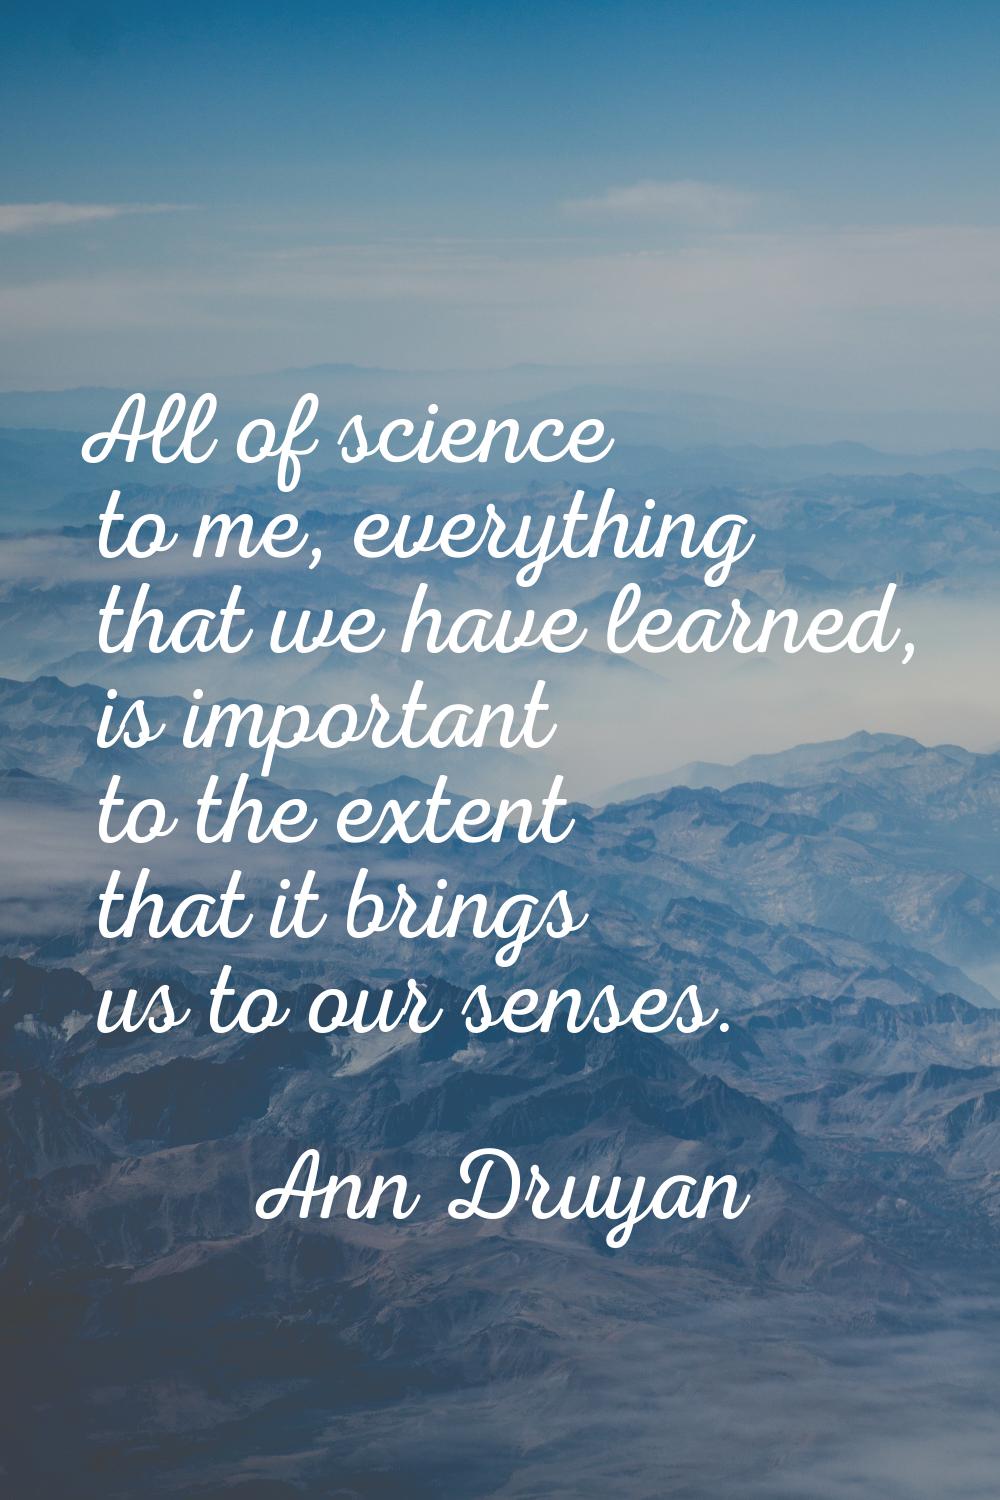 All of science to me, everything that we have learned, is important to the extent that it brings us